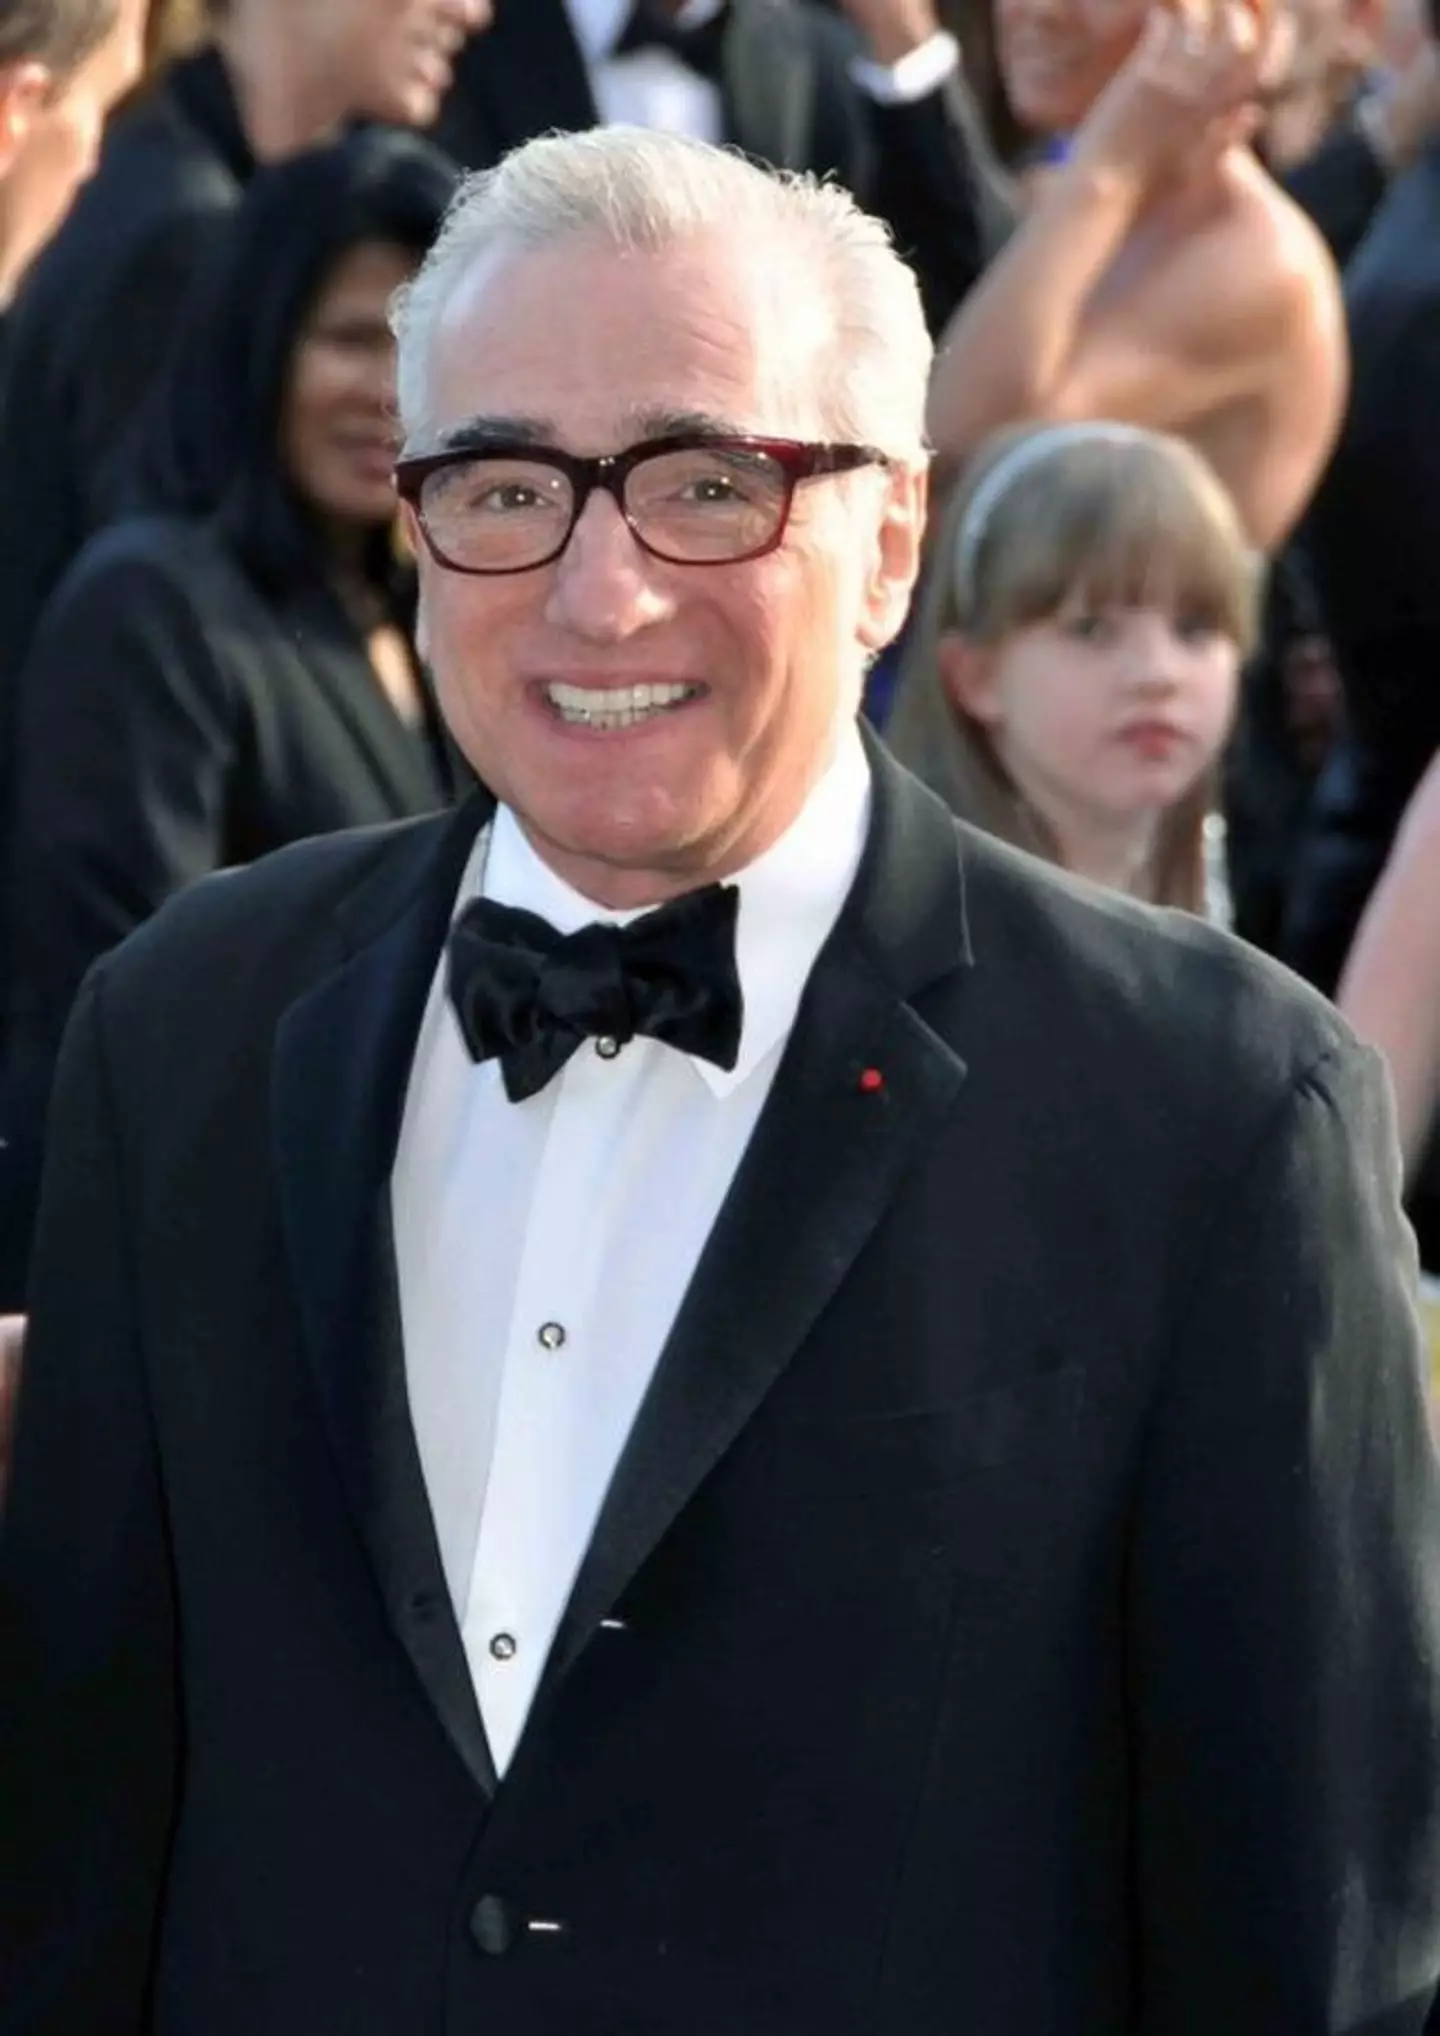 Martin Scorsese was filled with praise for the film.